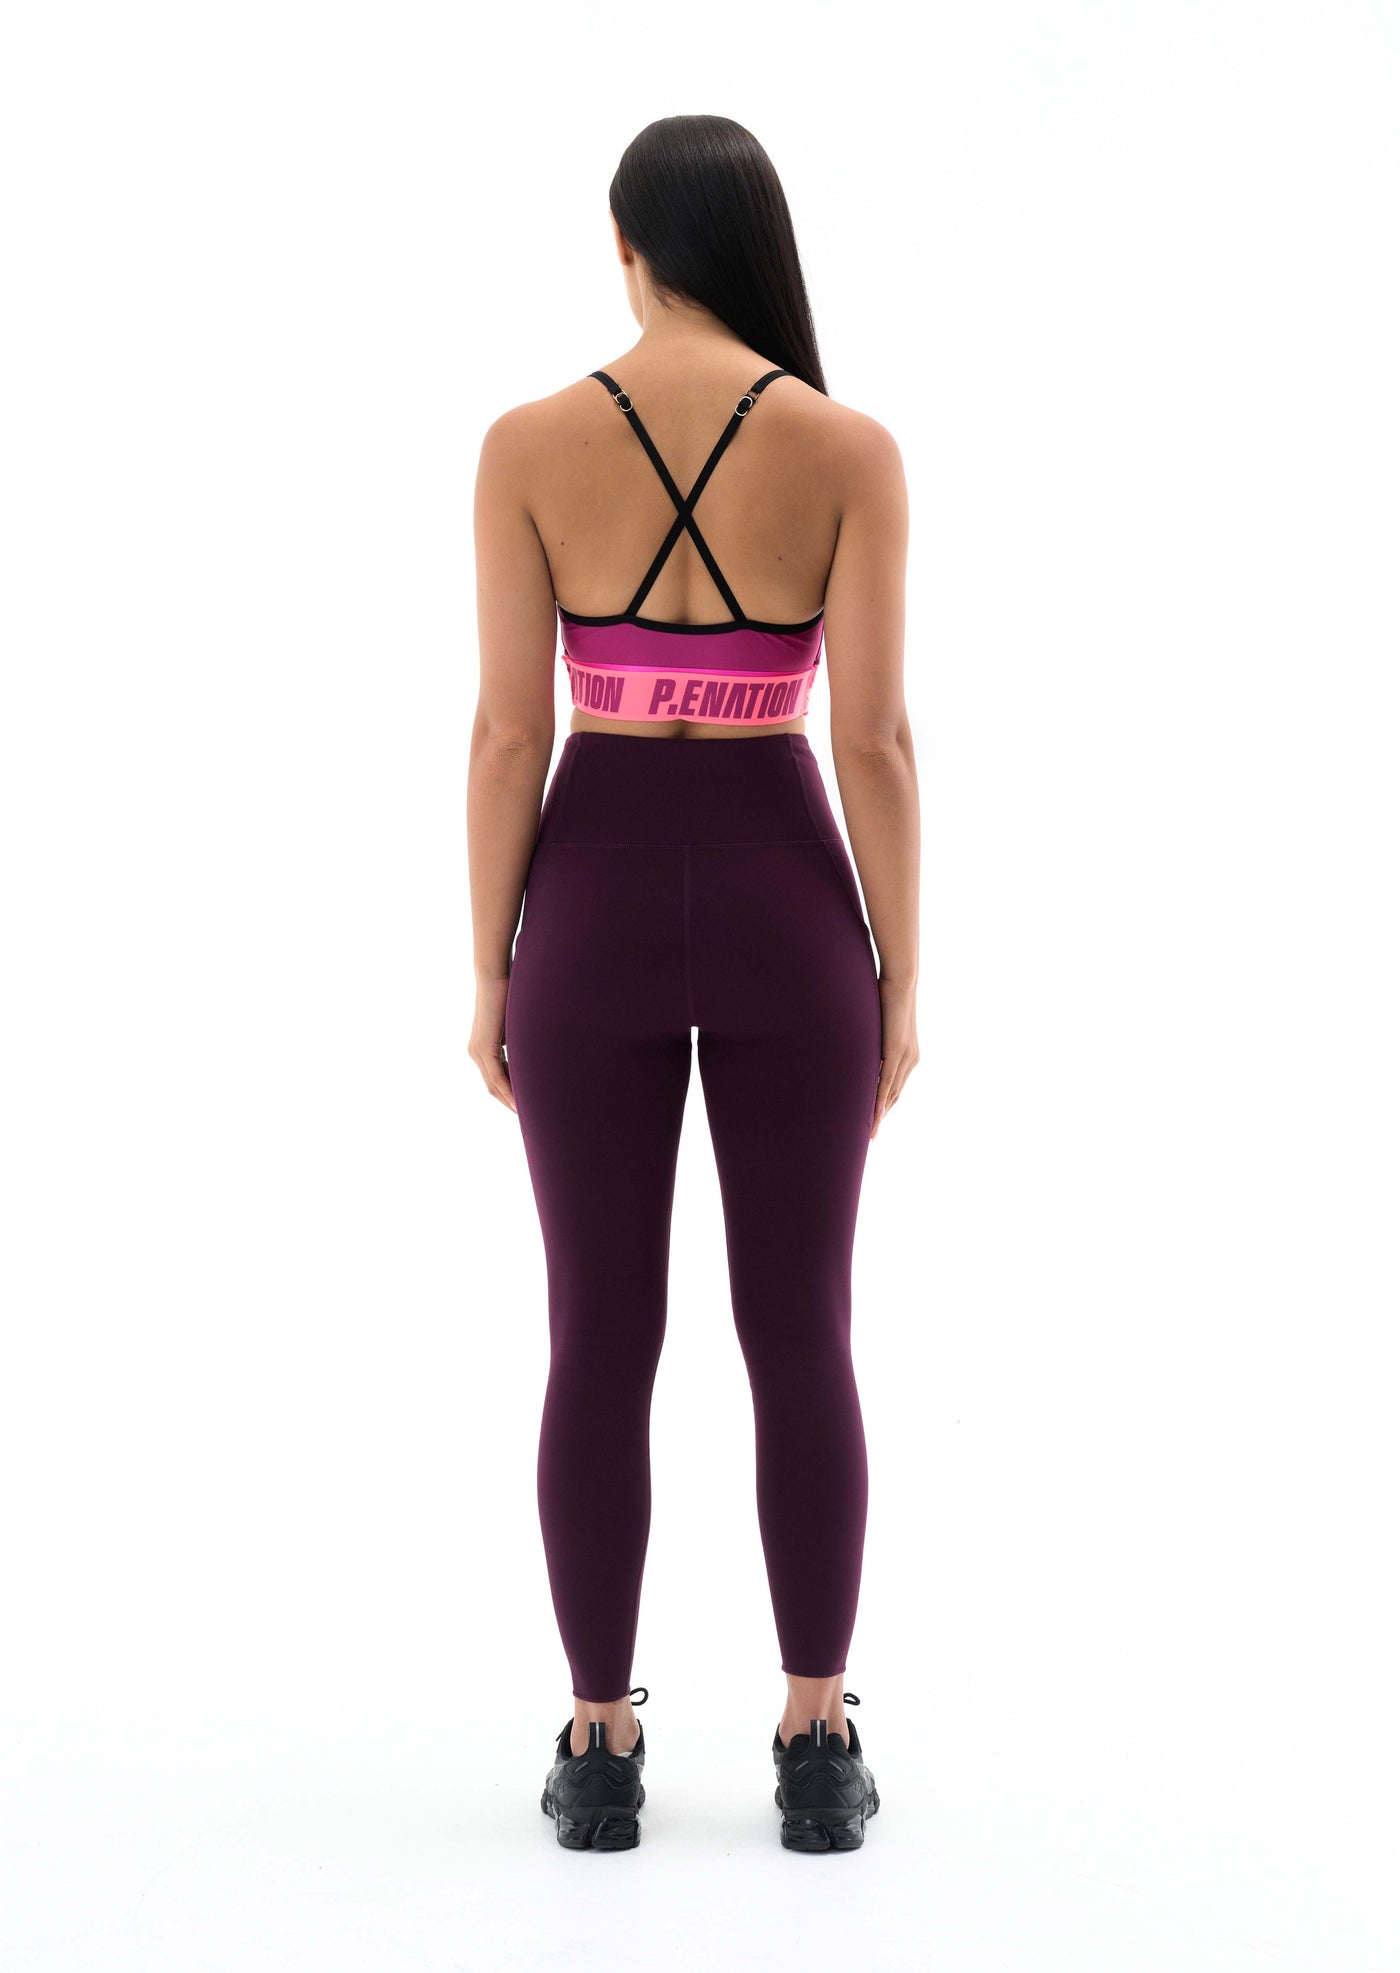 Purple Leggings Outfit Workout Plan  International Society of Precision  Agriculture